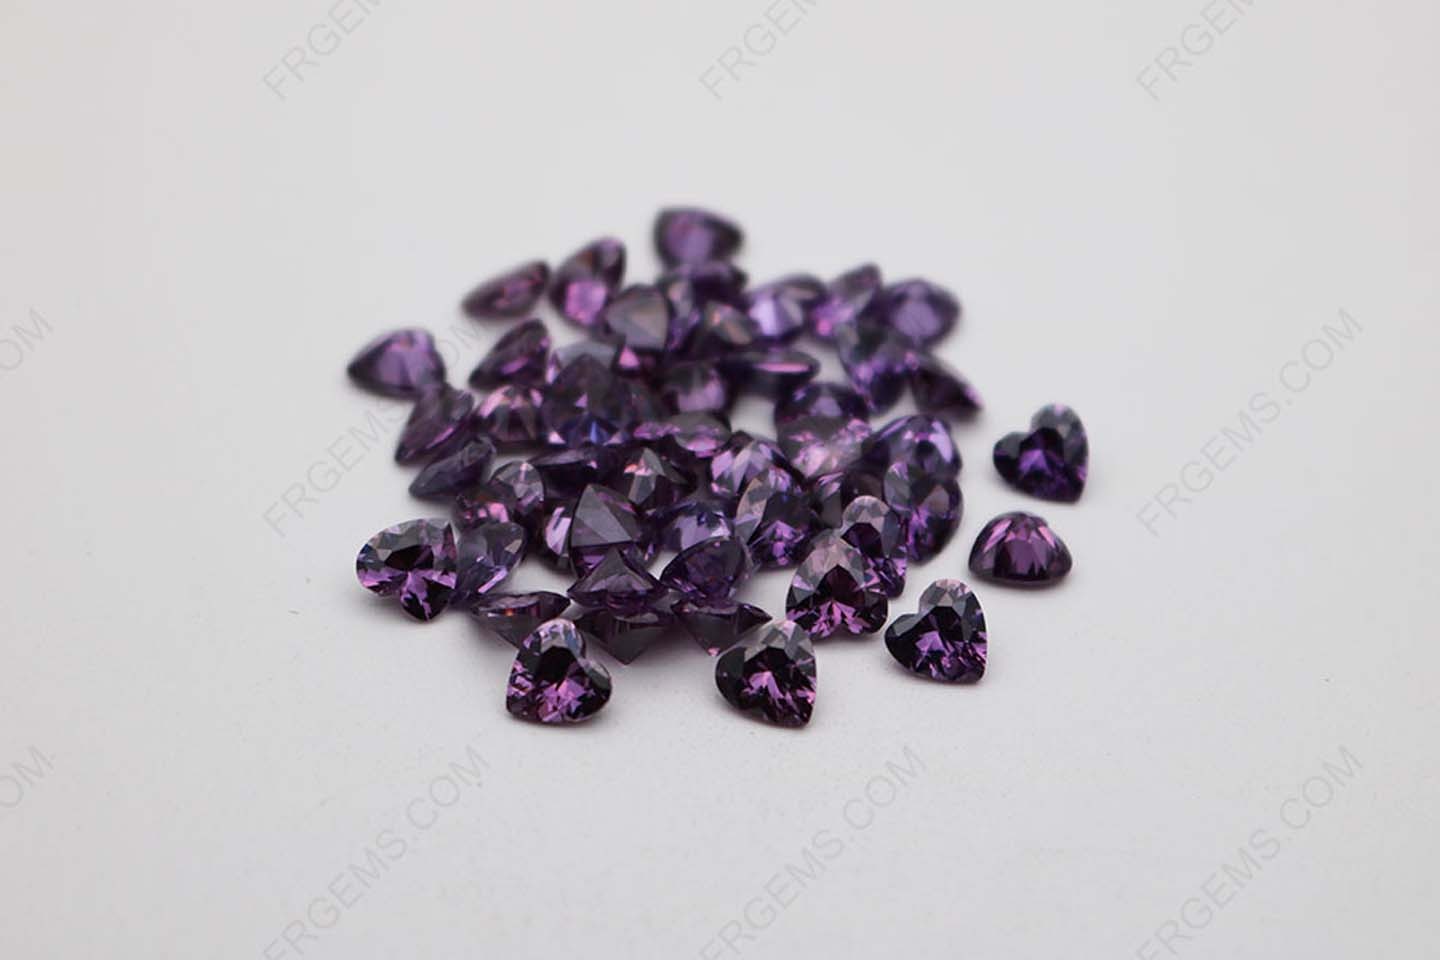 Cubic Zirconia Amethyst Color Heart Shape faceted cut 7x7mm stones CZ10 IMG_1321